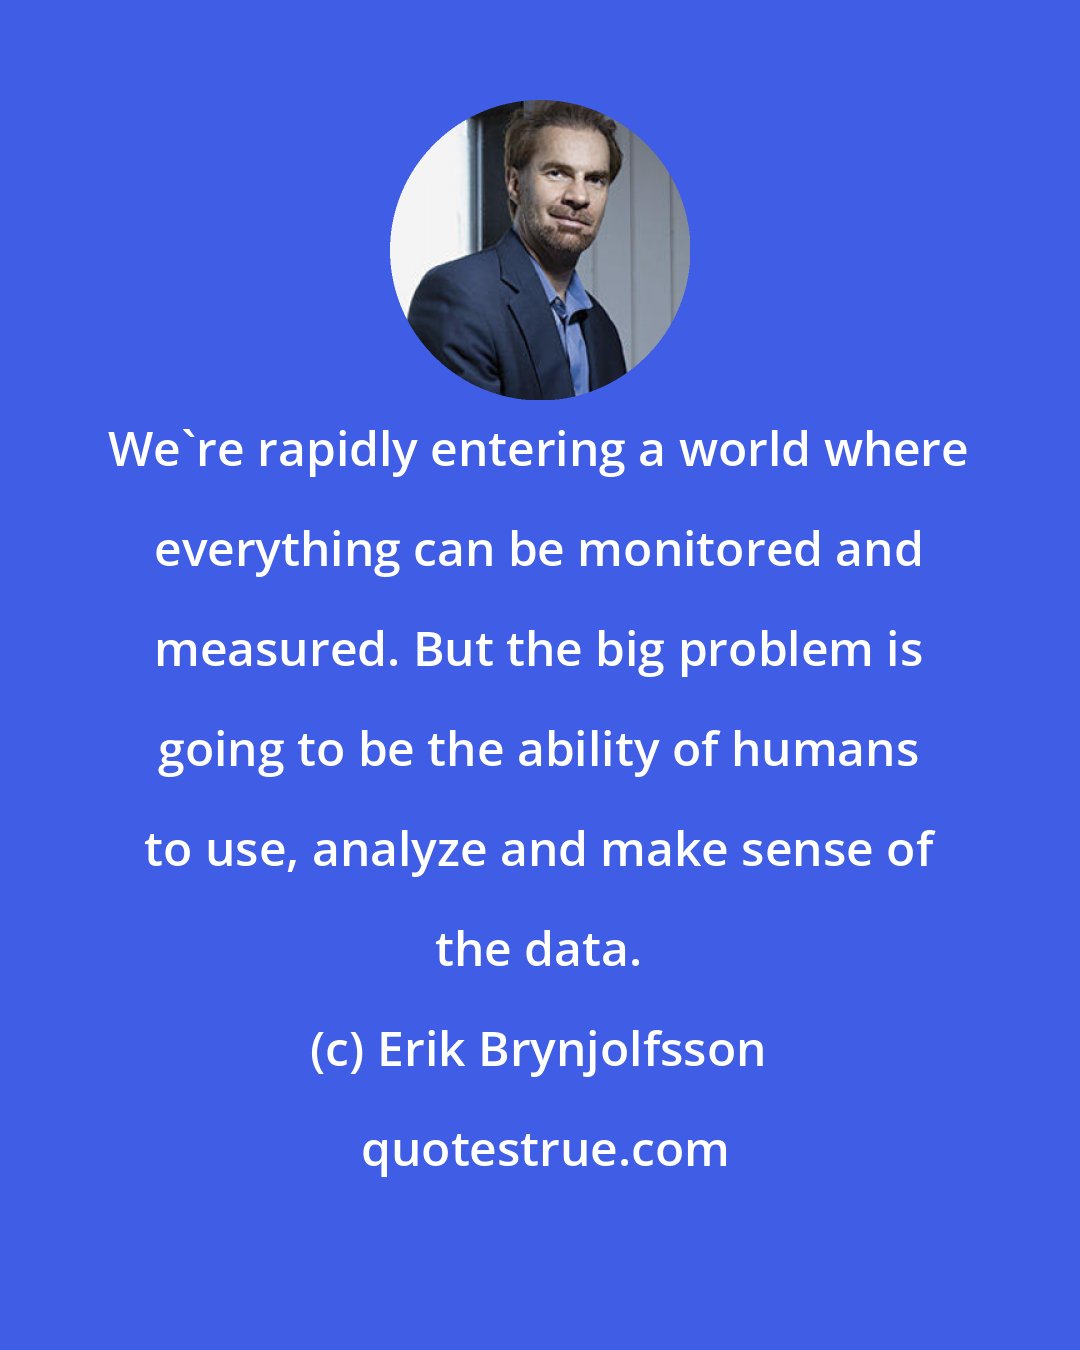 Erik Brynjolfsson: We're rapidly entering a world where everything can be monitored and measured. But the big problem is going to be the ability of humans to use, analyze and make sense of the data.